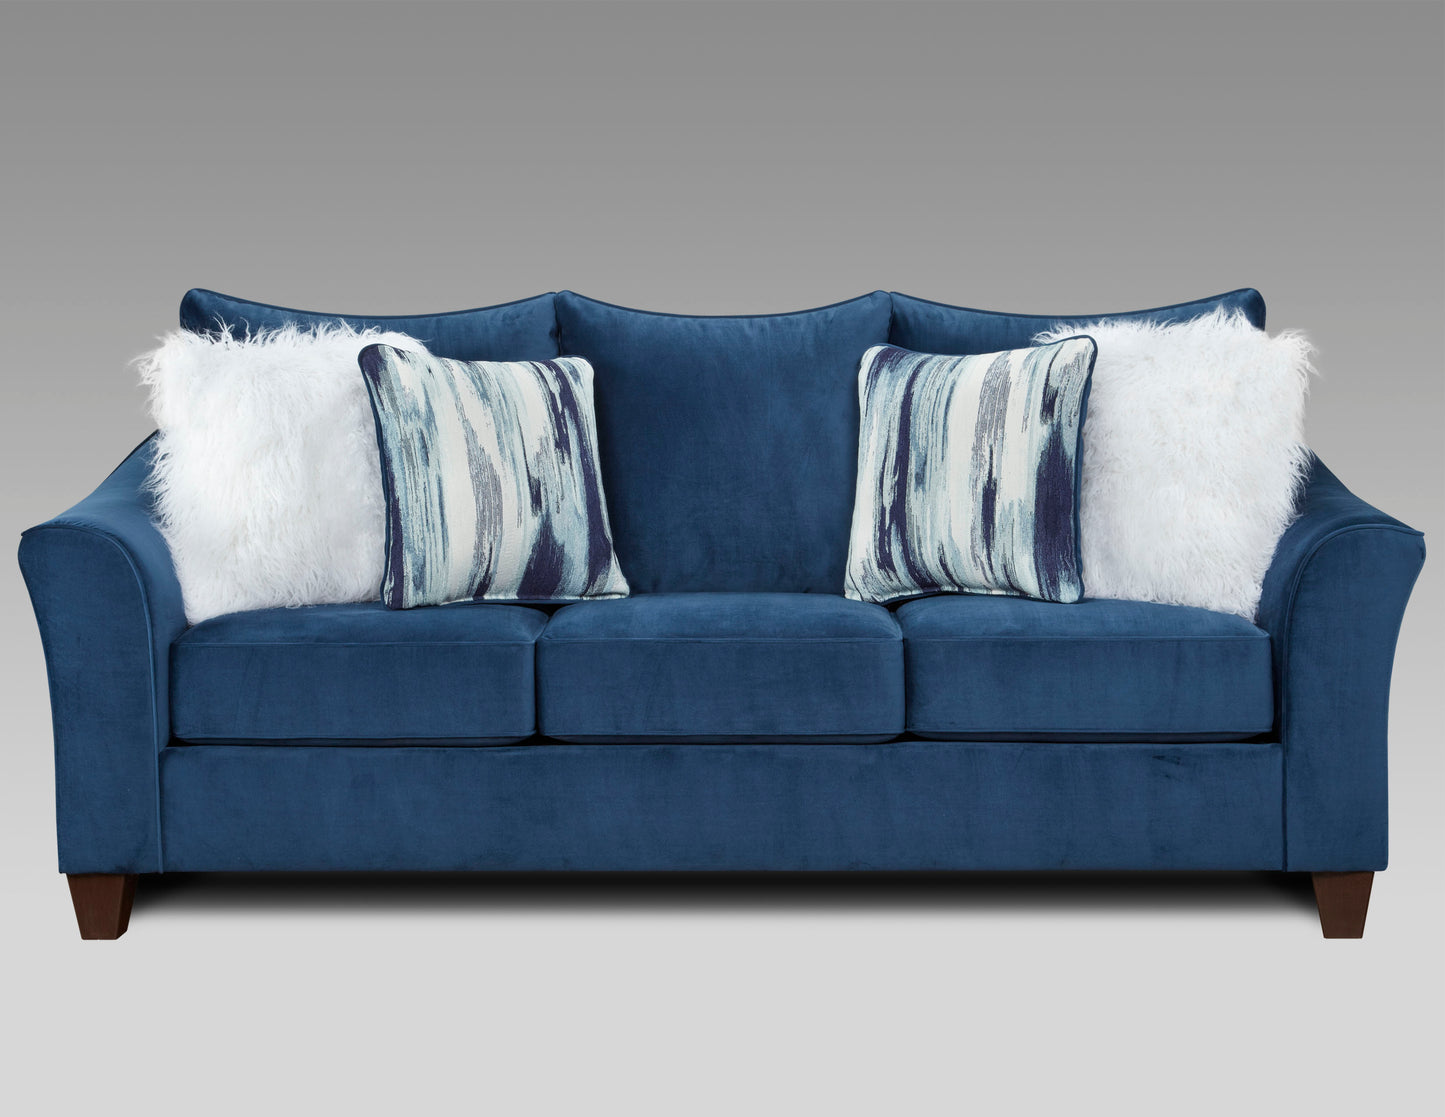 Camero Fabric Pillowback Living Room Collection, Navy Blue